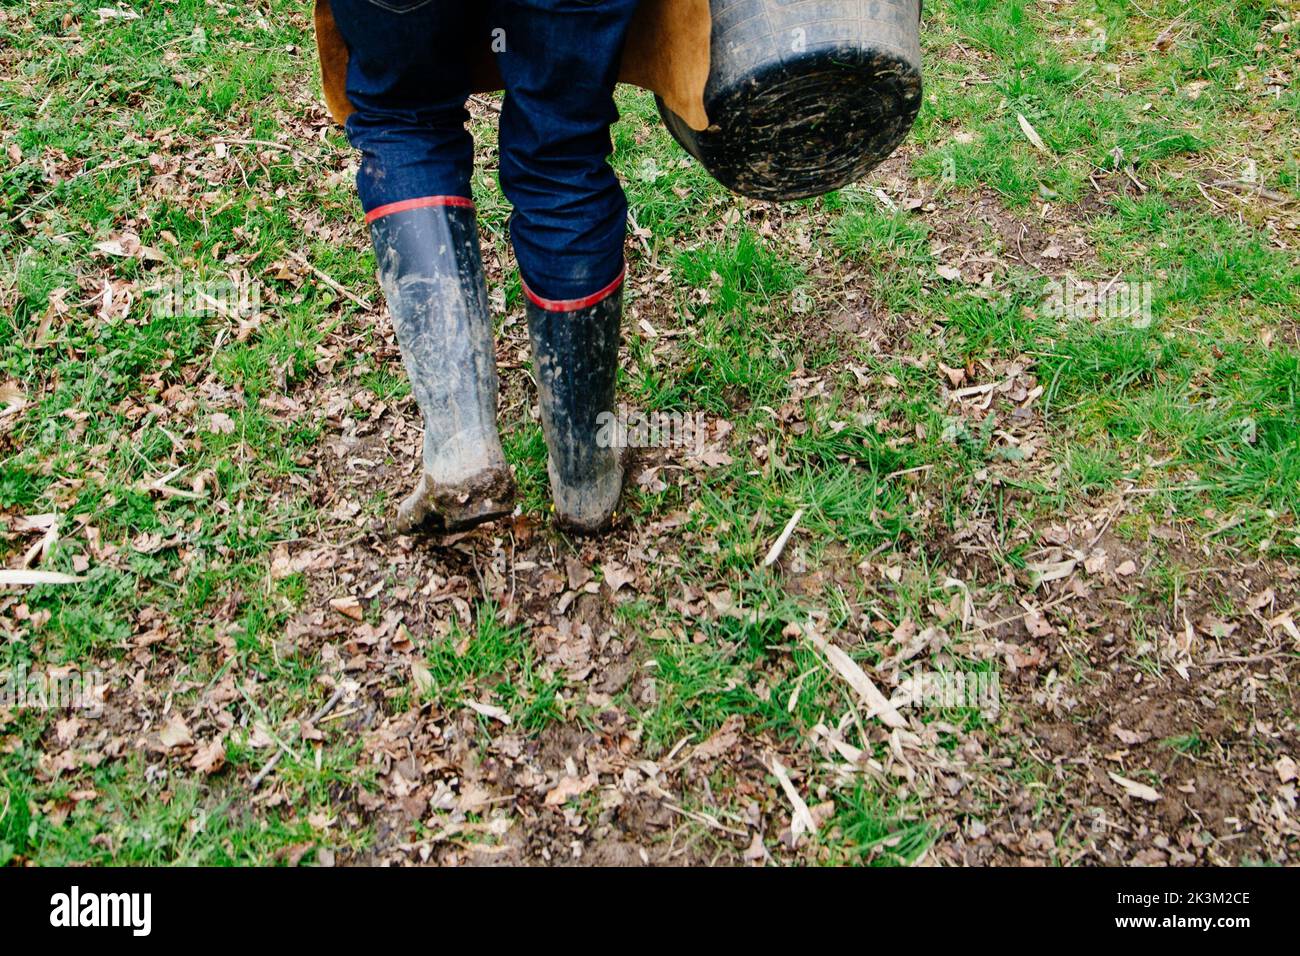 A selective of a person in muddy welly boots walking on green grass Stock Photo